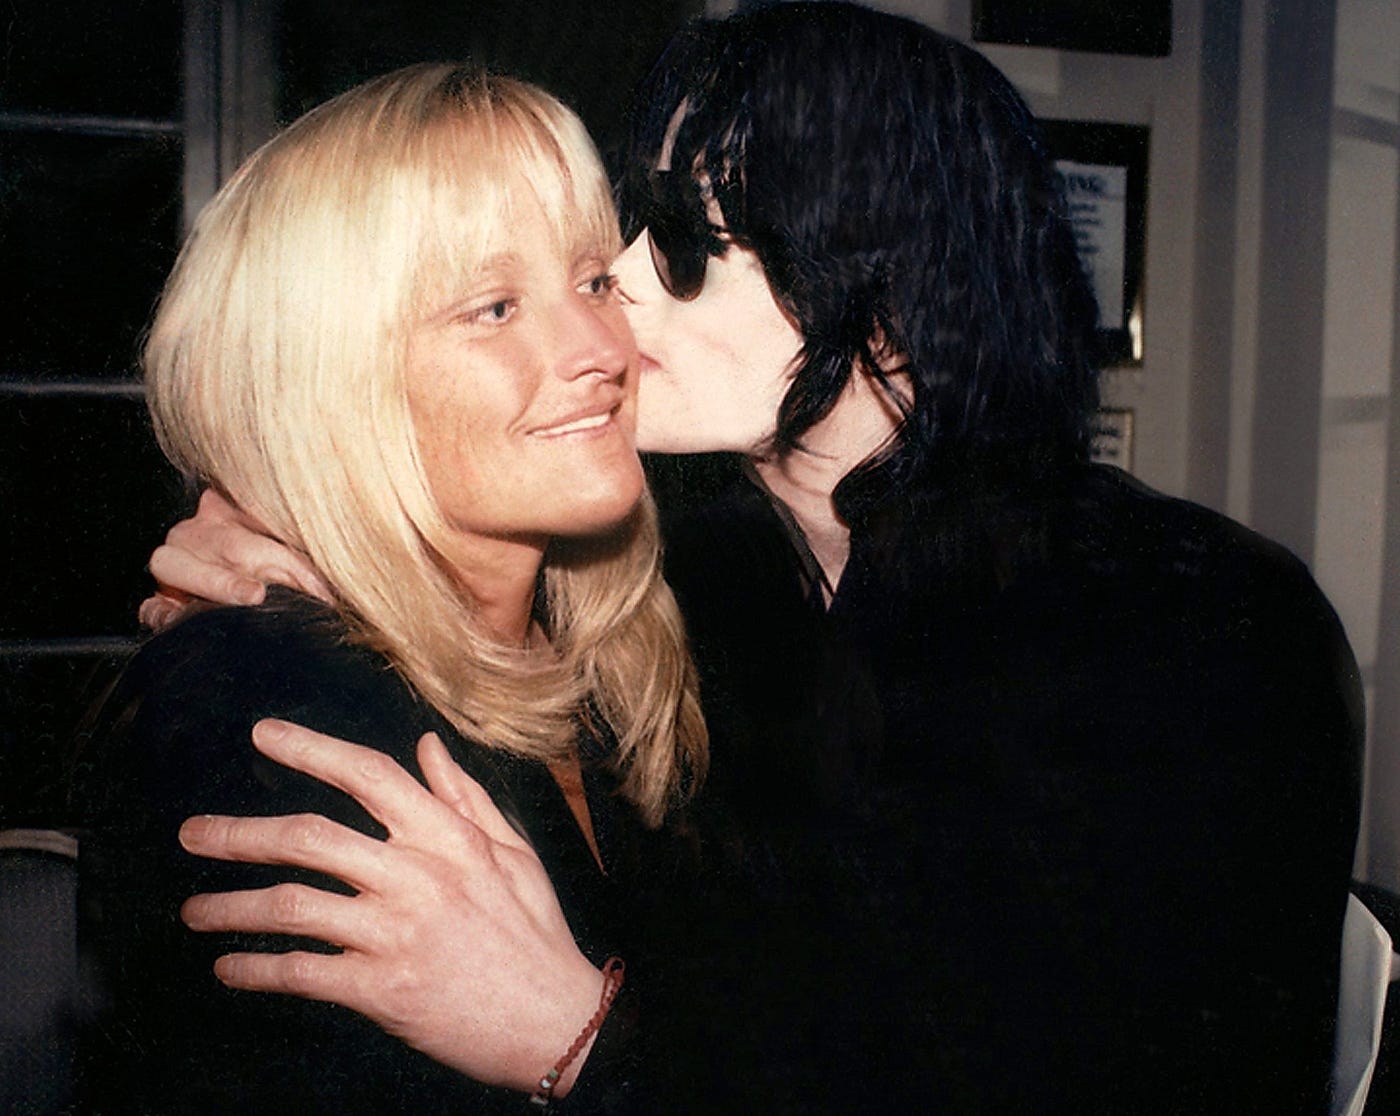 Michael Jackson and Debbie Rowe Their Untold Love Story by the detail image